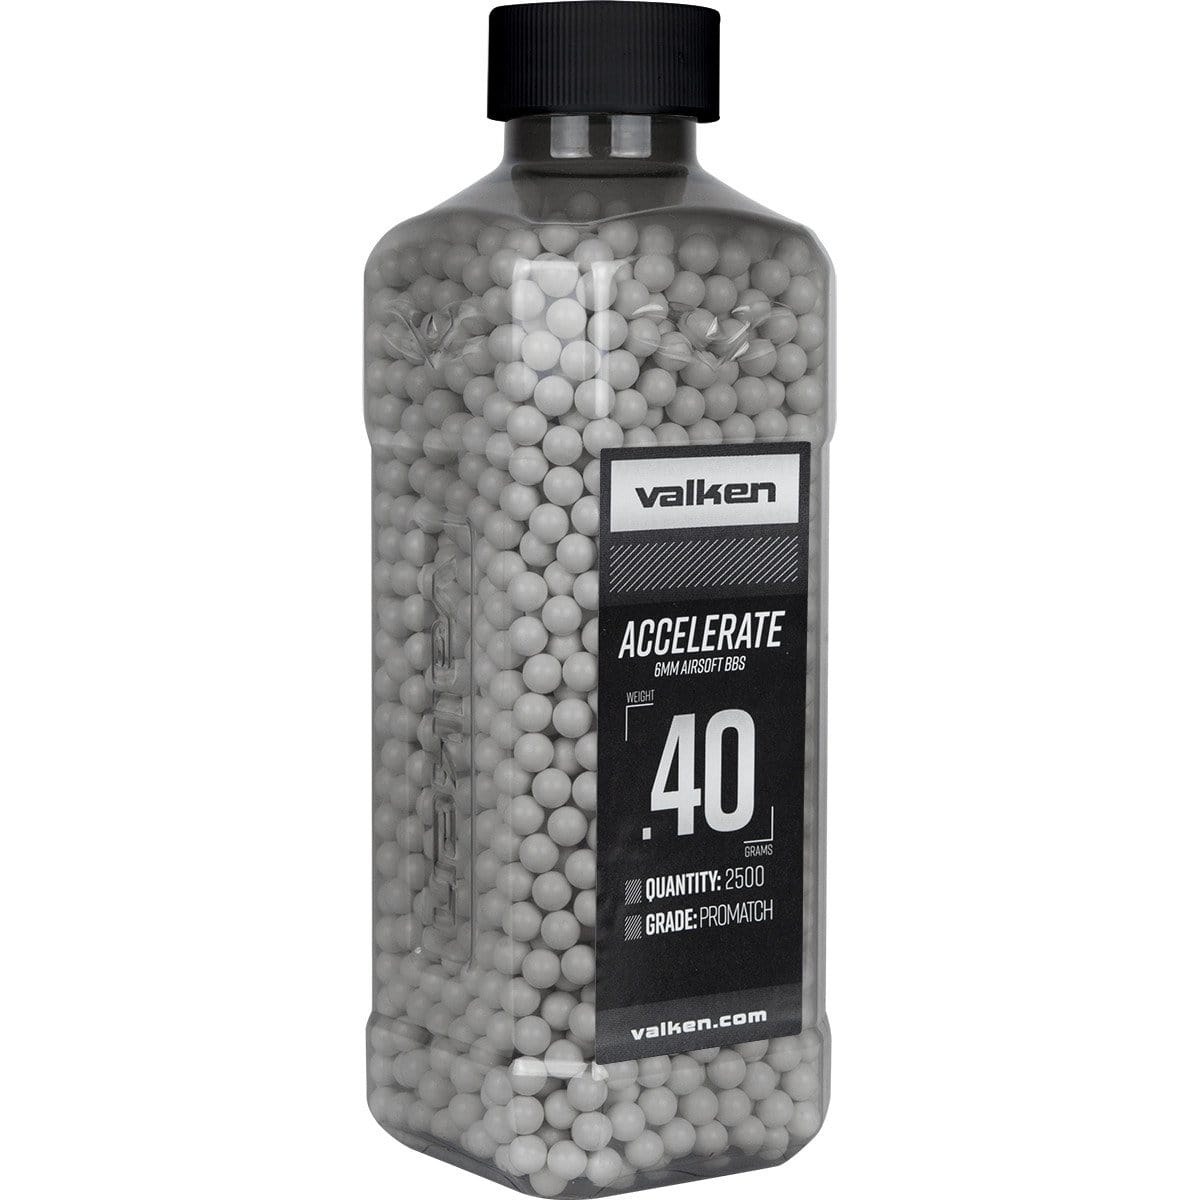 Valken Accelerate Airsoft BBs - 0.40G 2500CT-White - Eminent Paintball And Airsoft